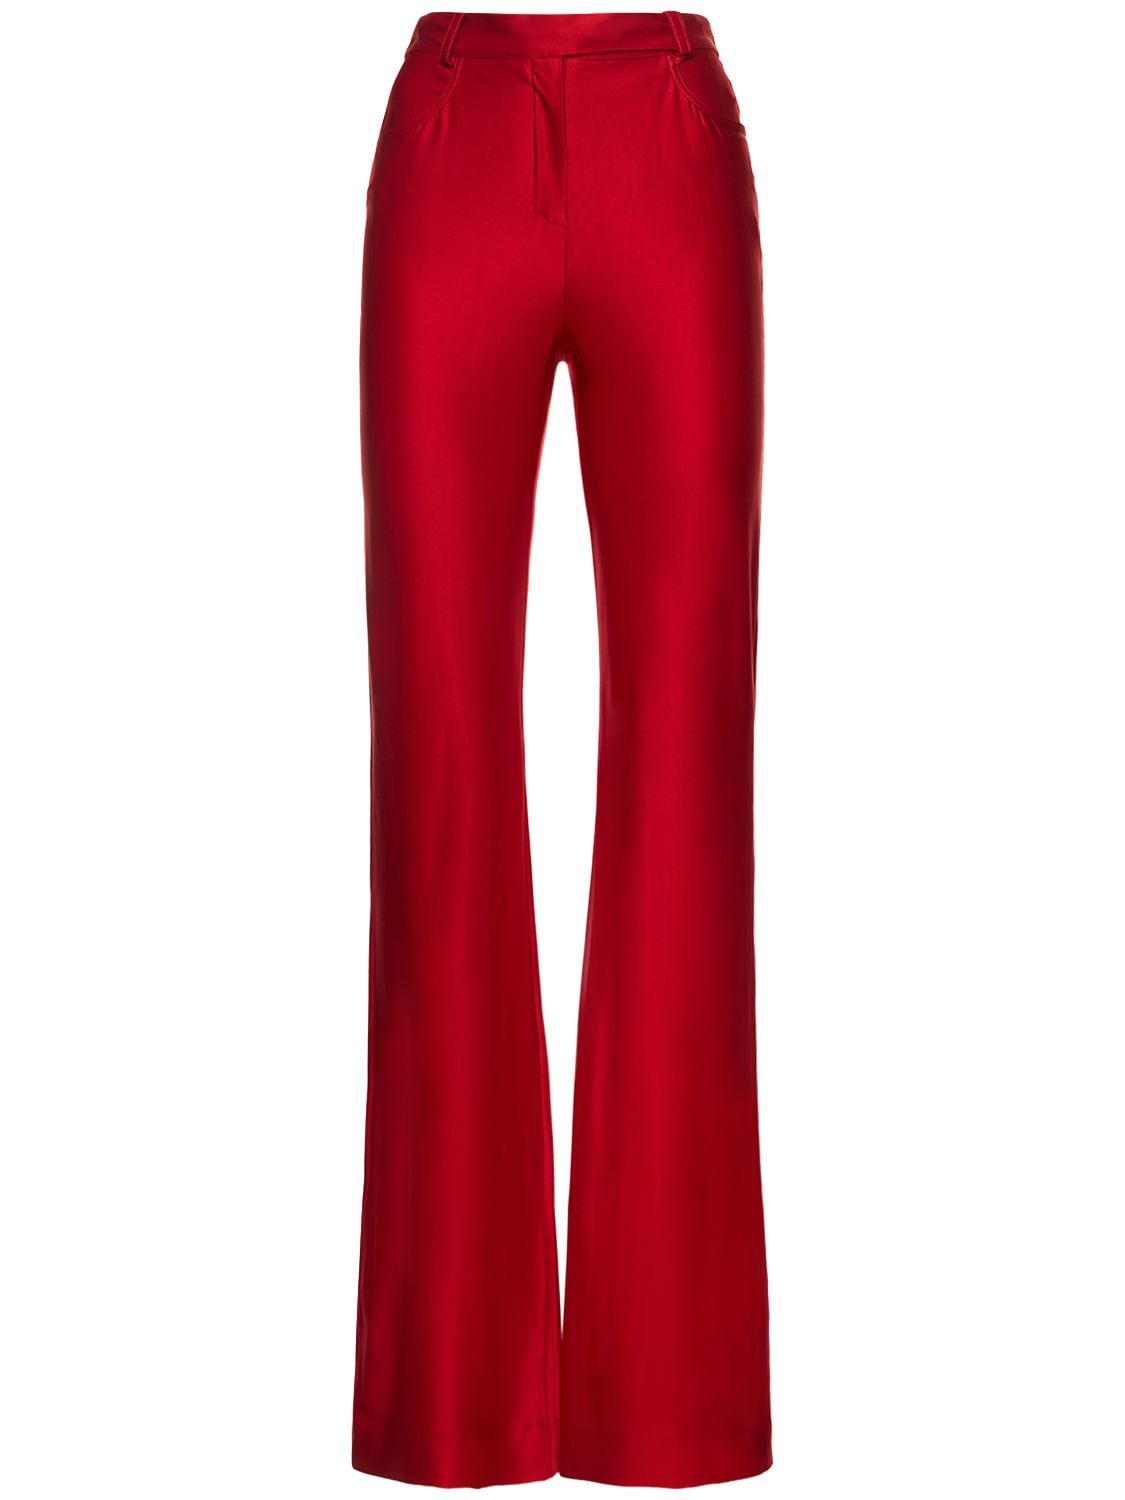 Fitted Shiny Jersey High Waist Pants